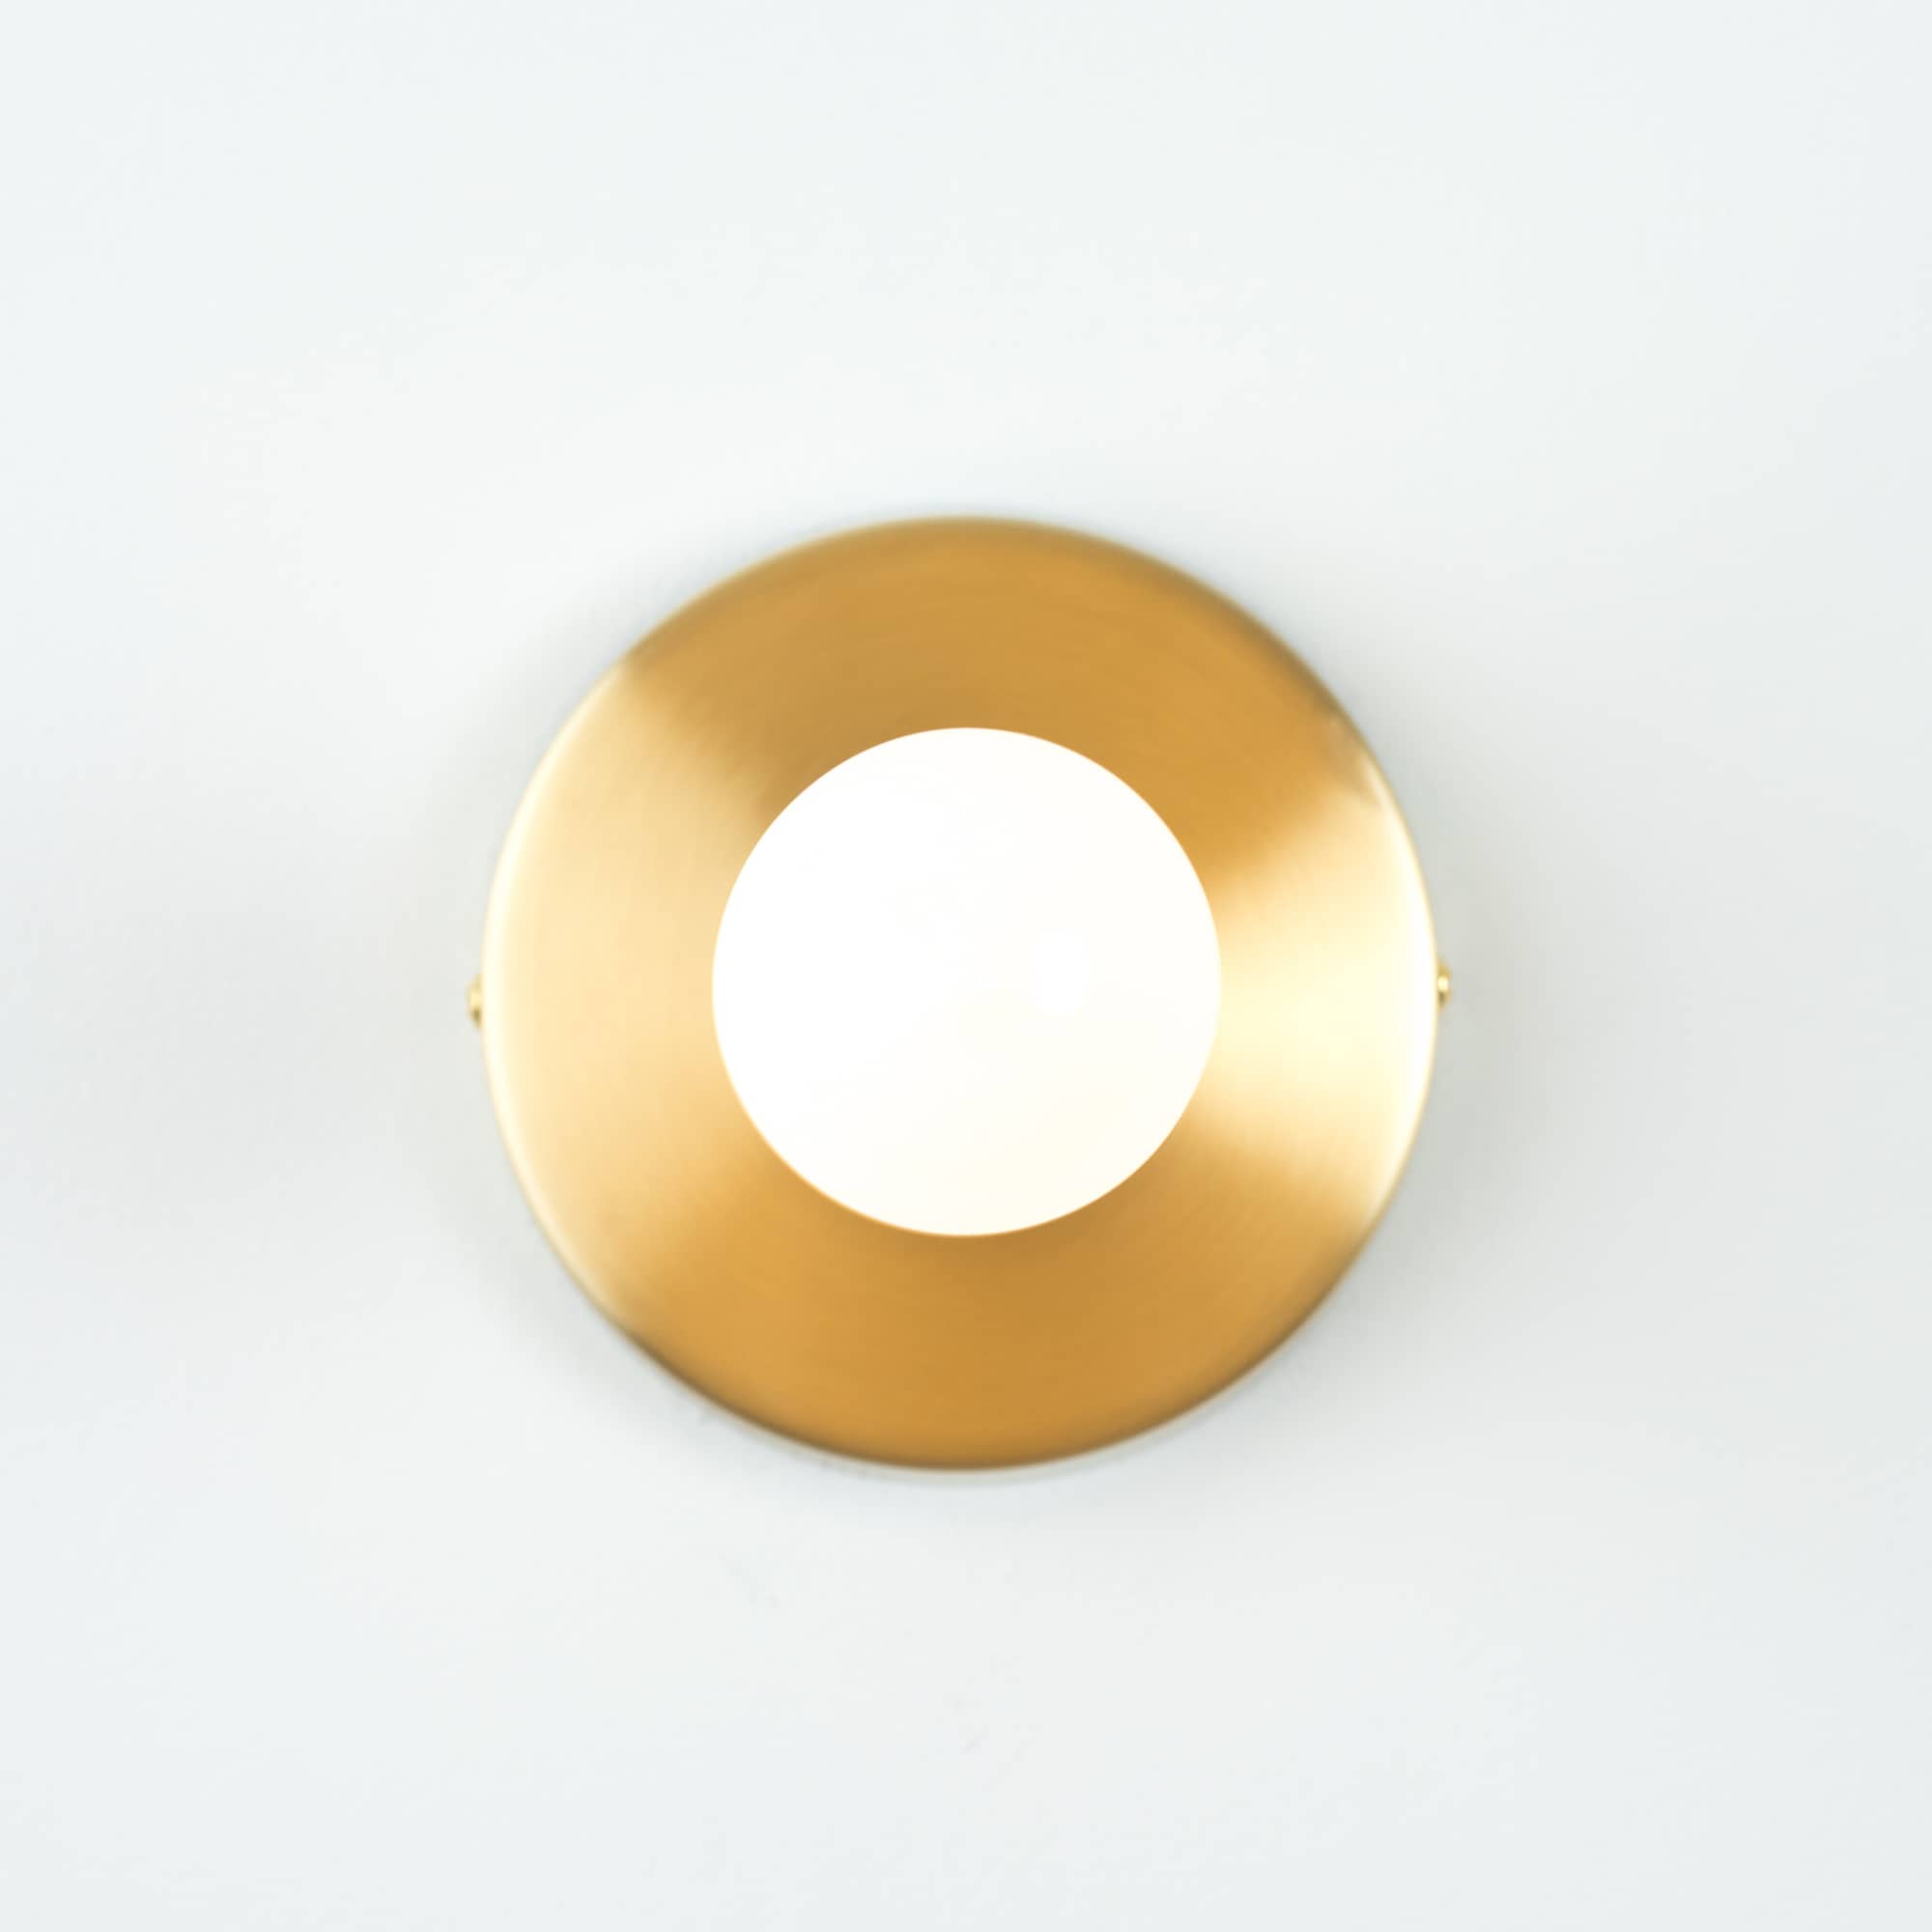 Button Light in Raw Brass finish. Pictured with a G25 milk glass light bulb. Straight on angle.